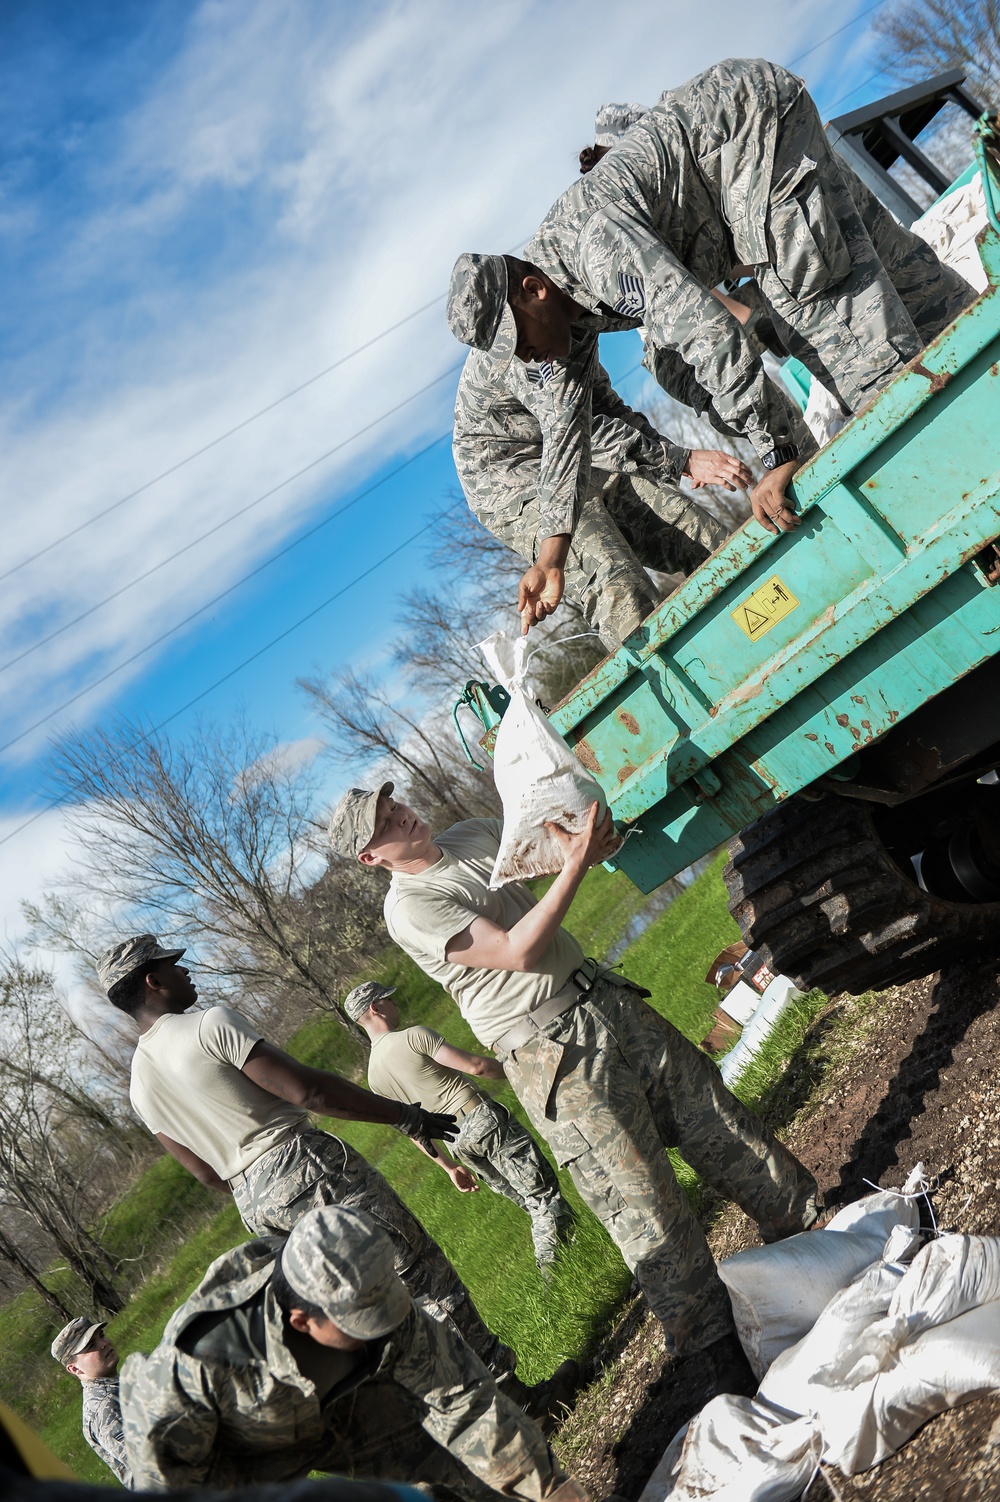 Standing ground: Military, community bolster Bossier Levees